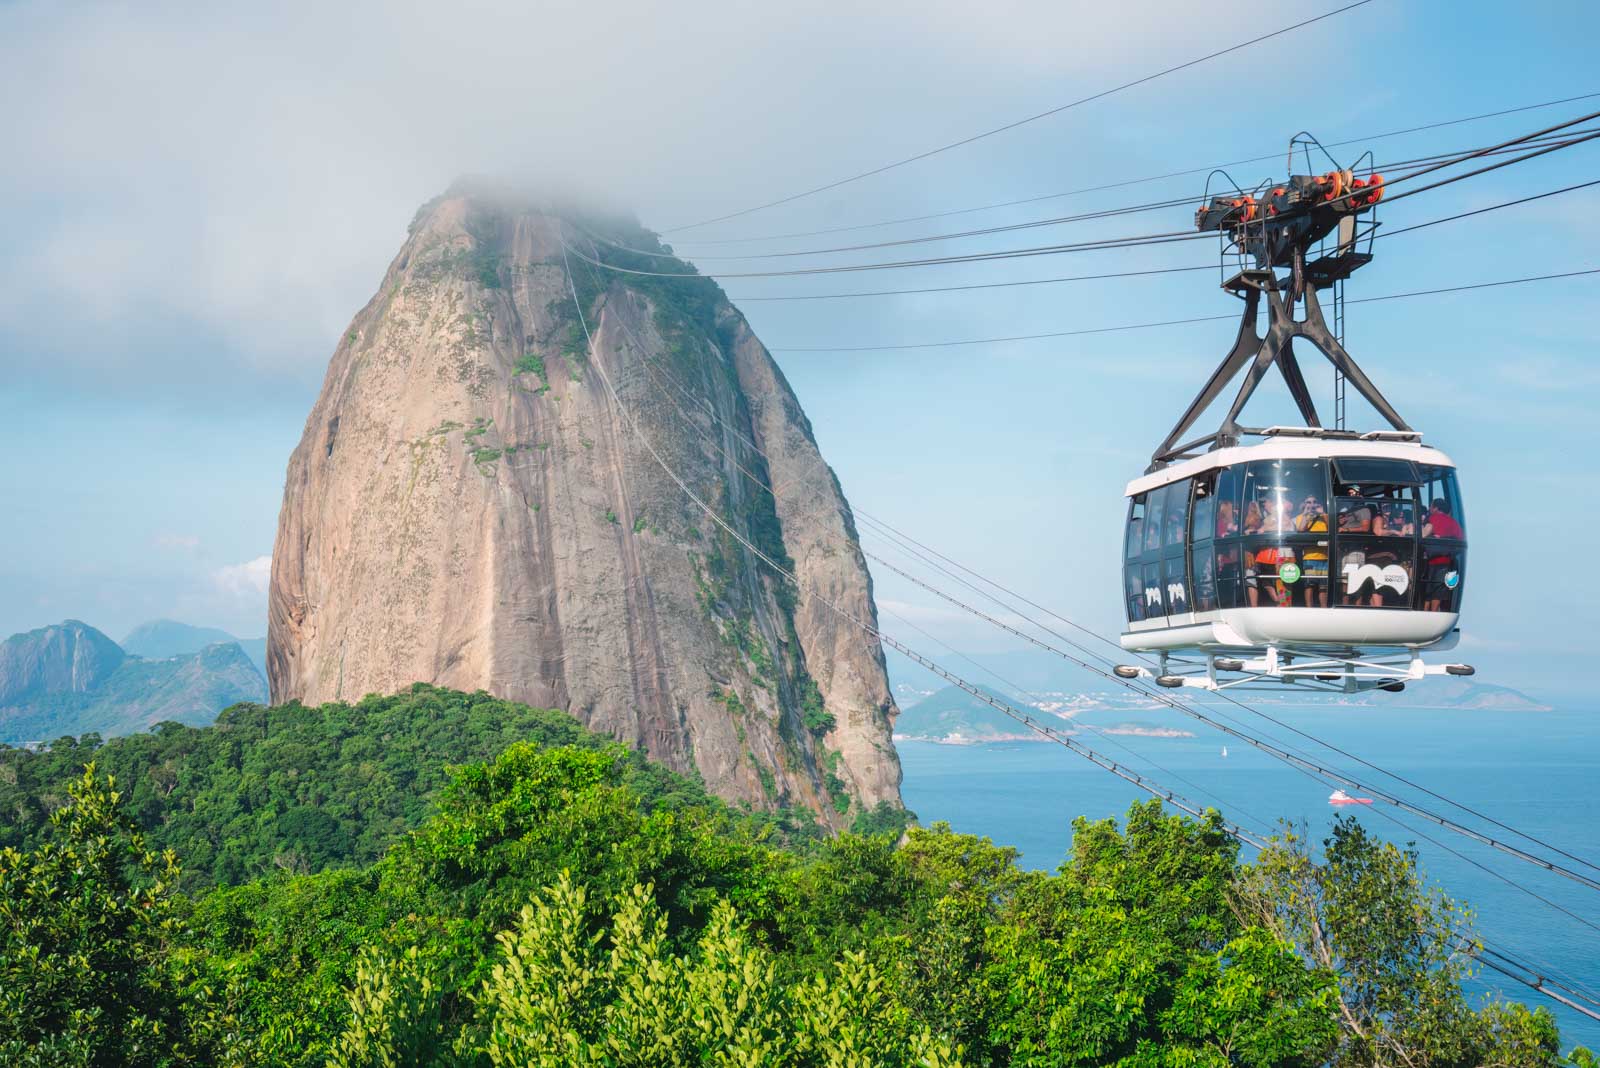 The Ultimate Rio de Janeiro Itinerary - A Guide to the Best Things